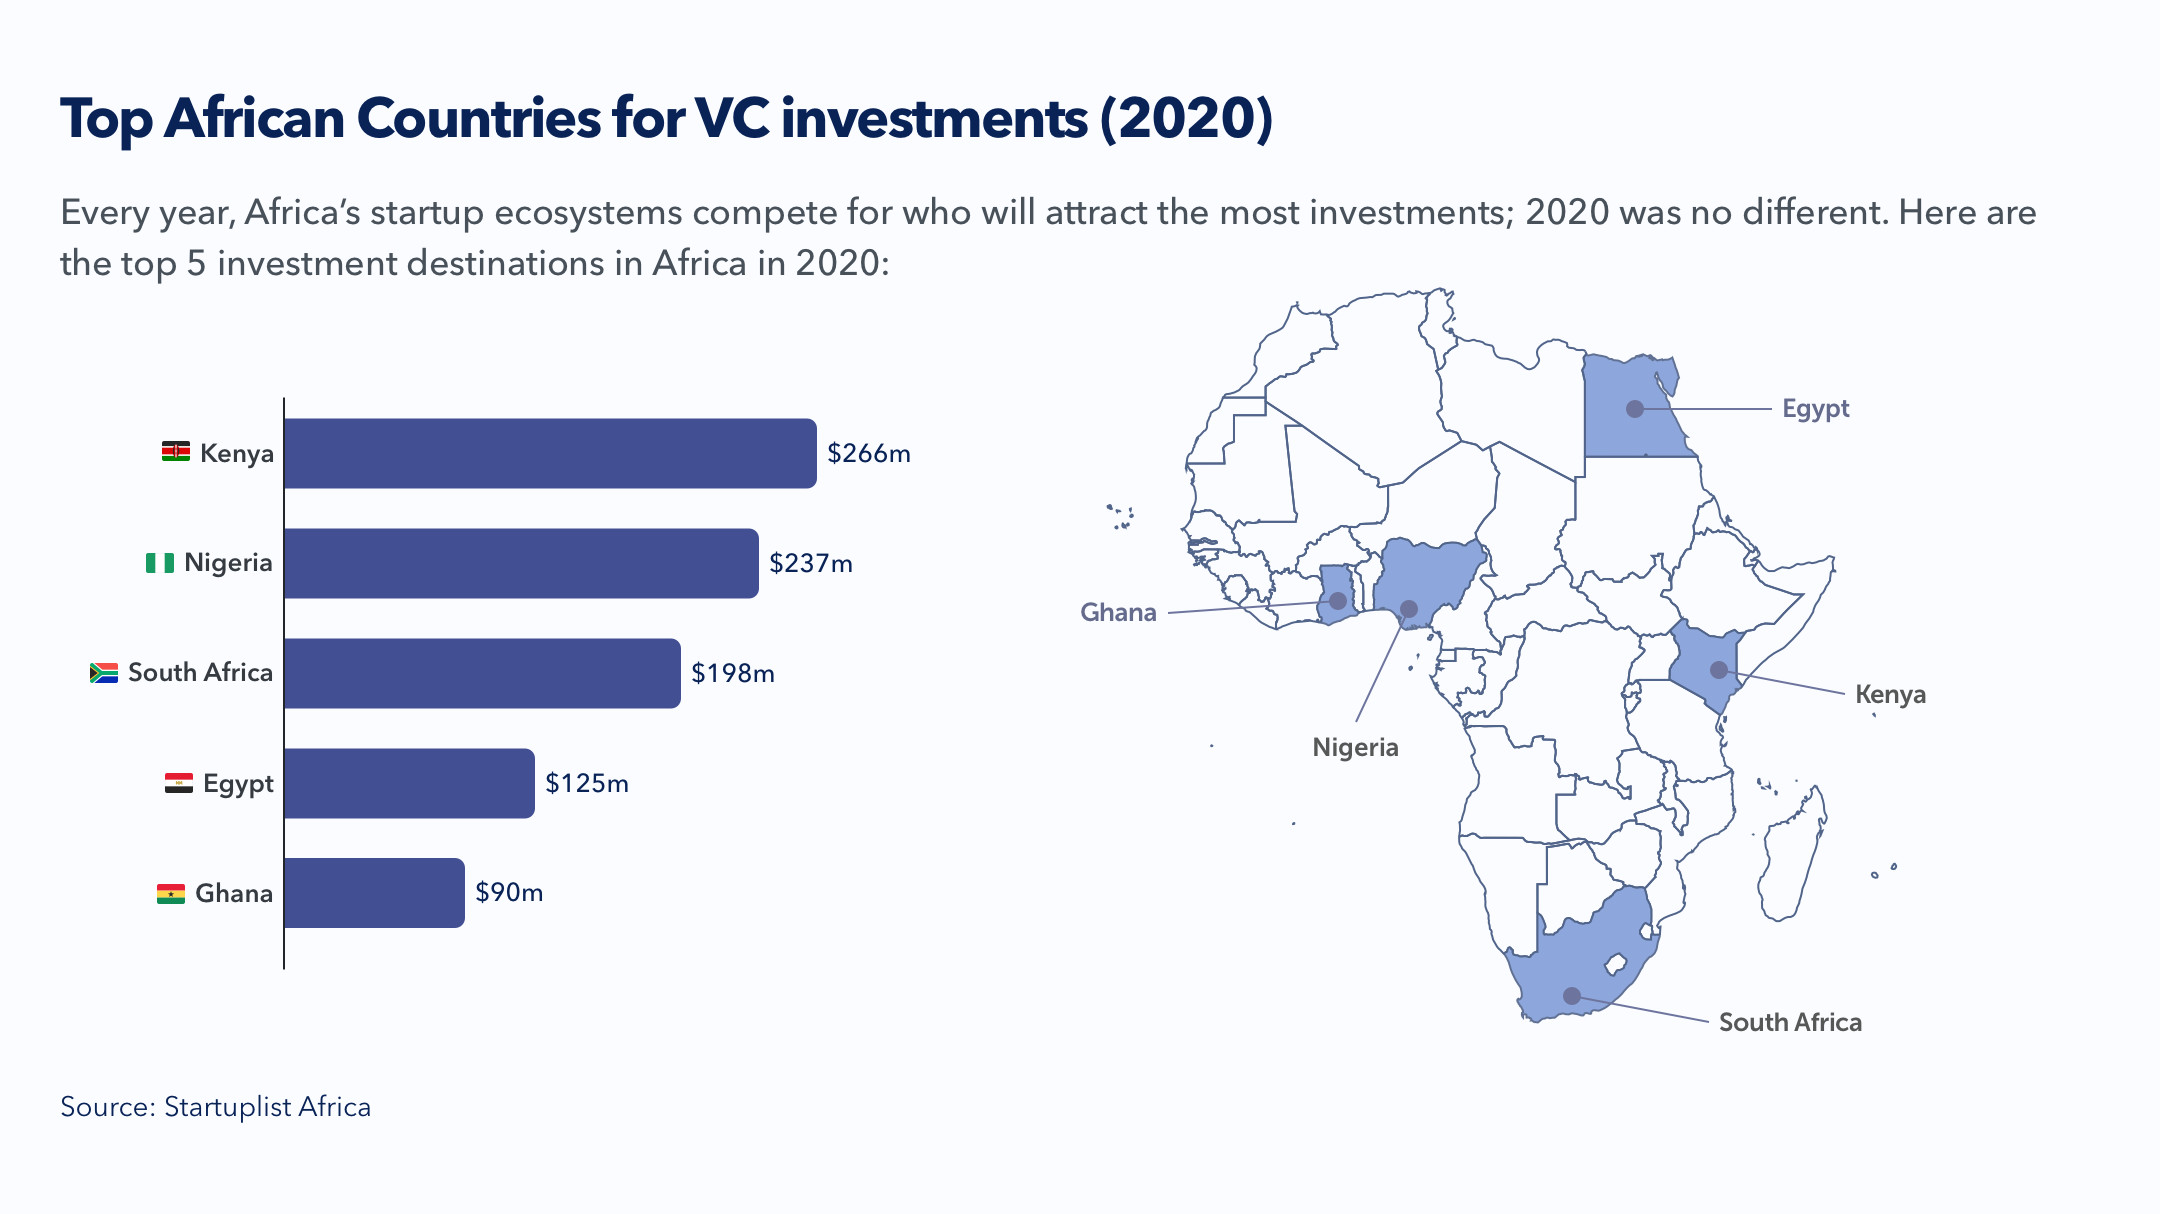 Kenya leads in Africa as Favourite Investment Destination